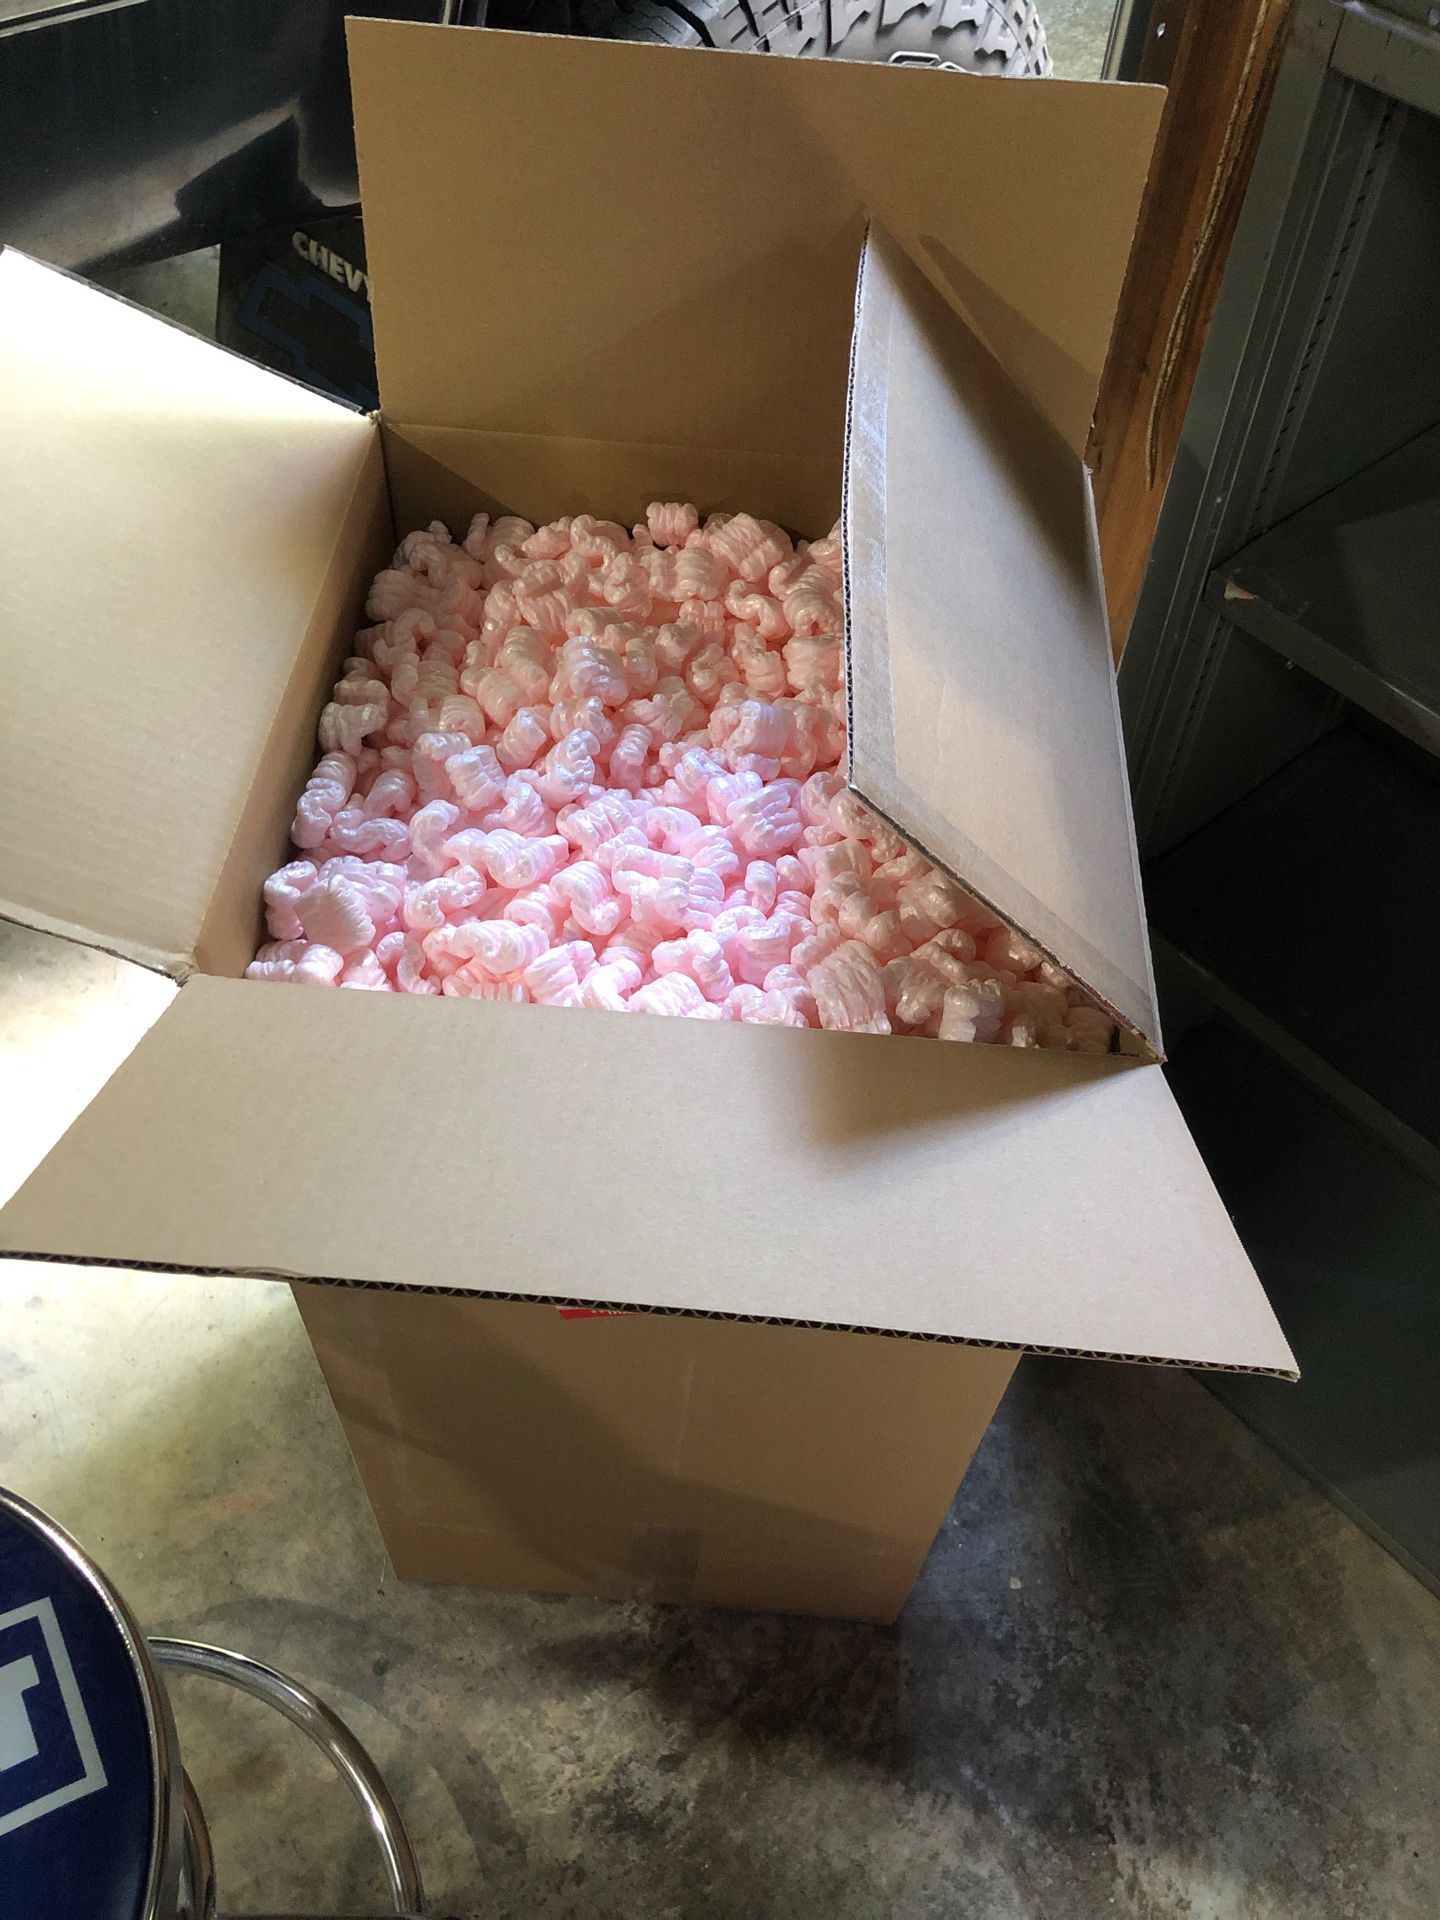 Packing peanuts, boxes too. FREE